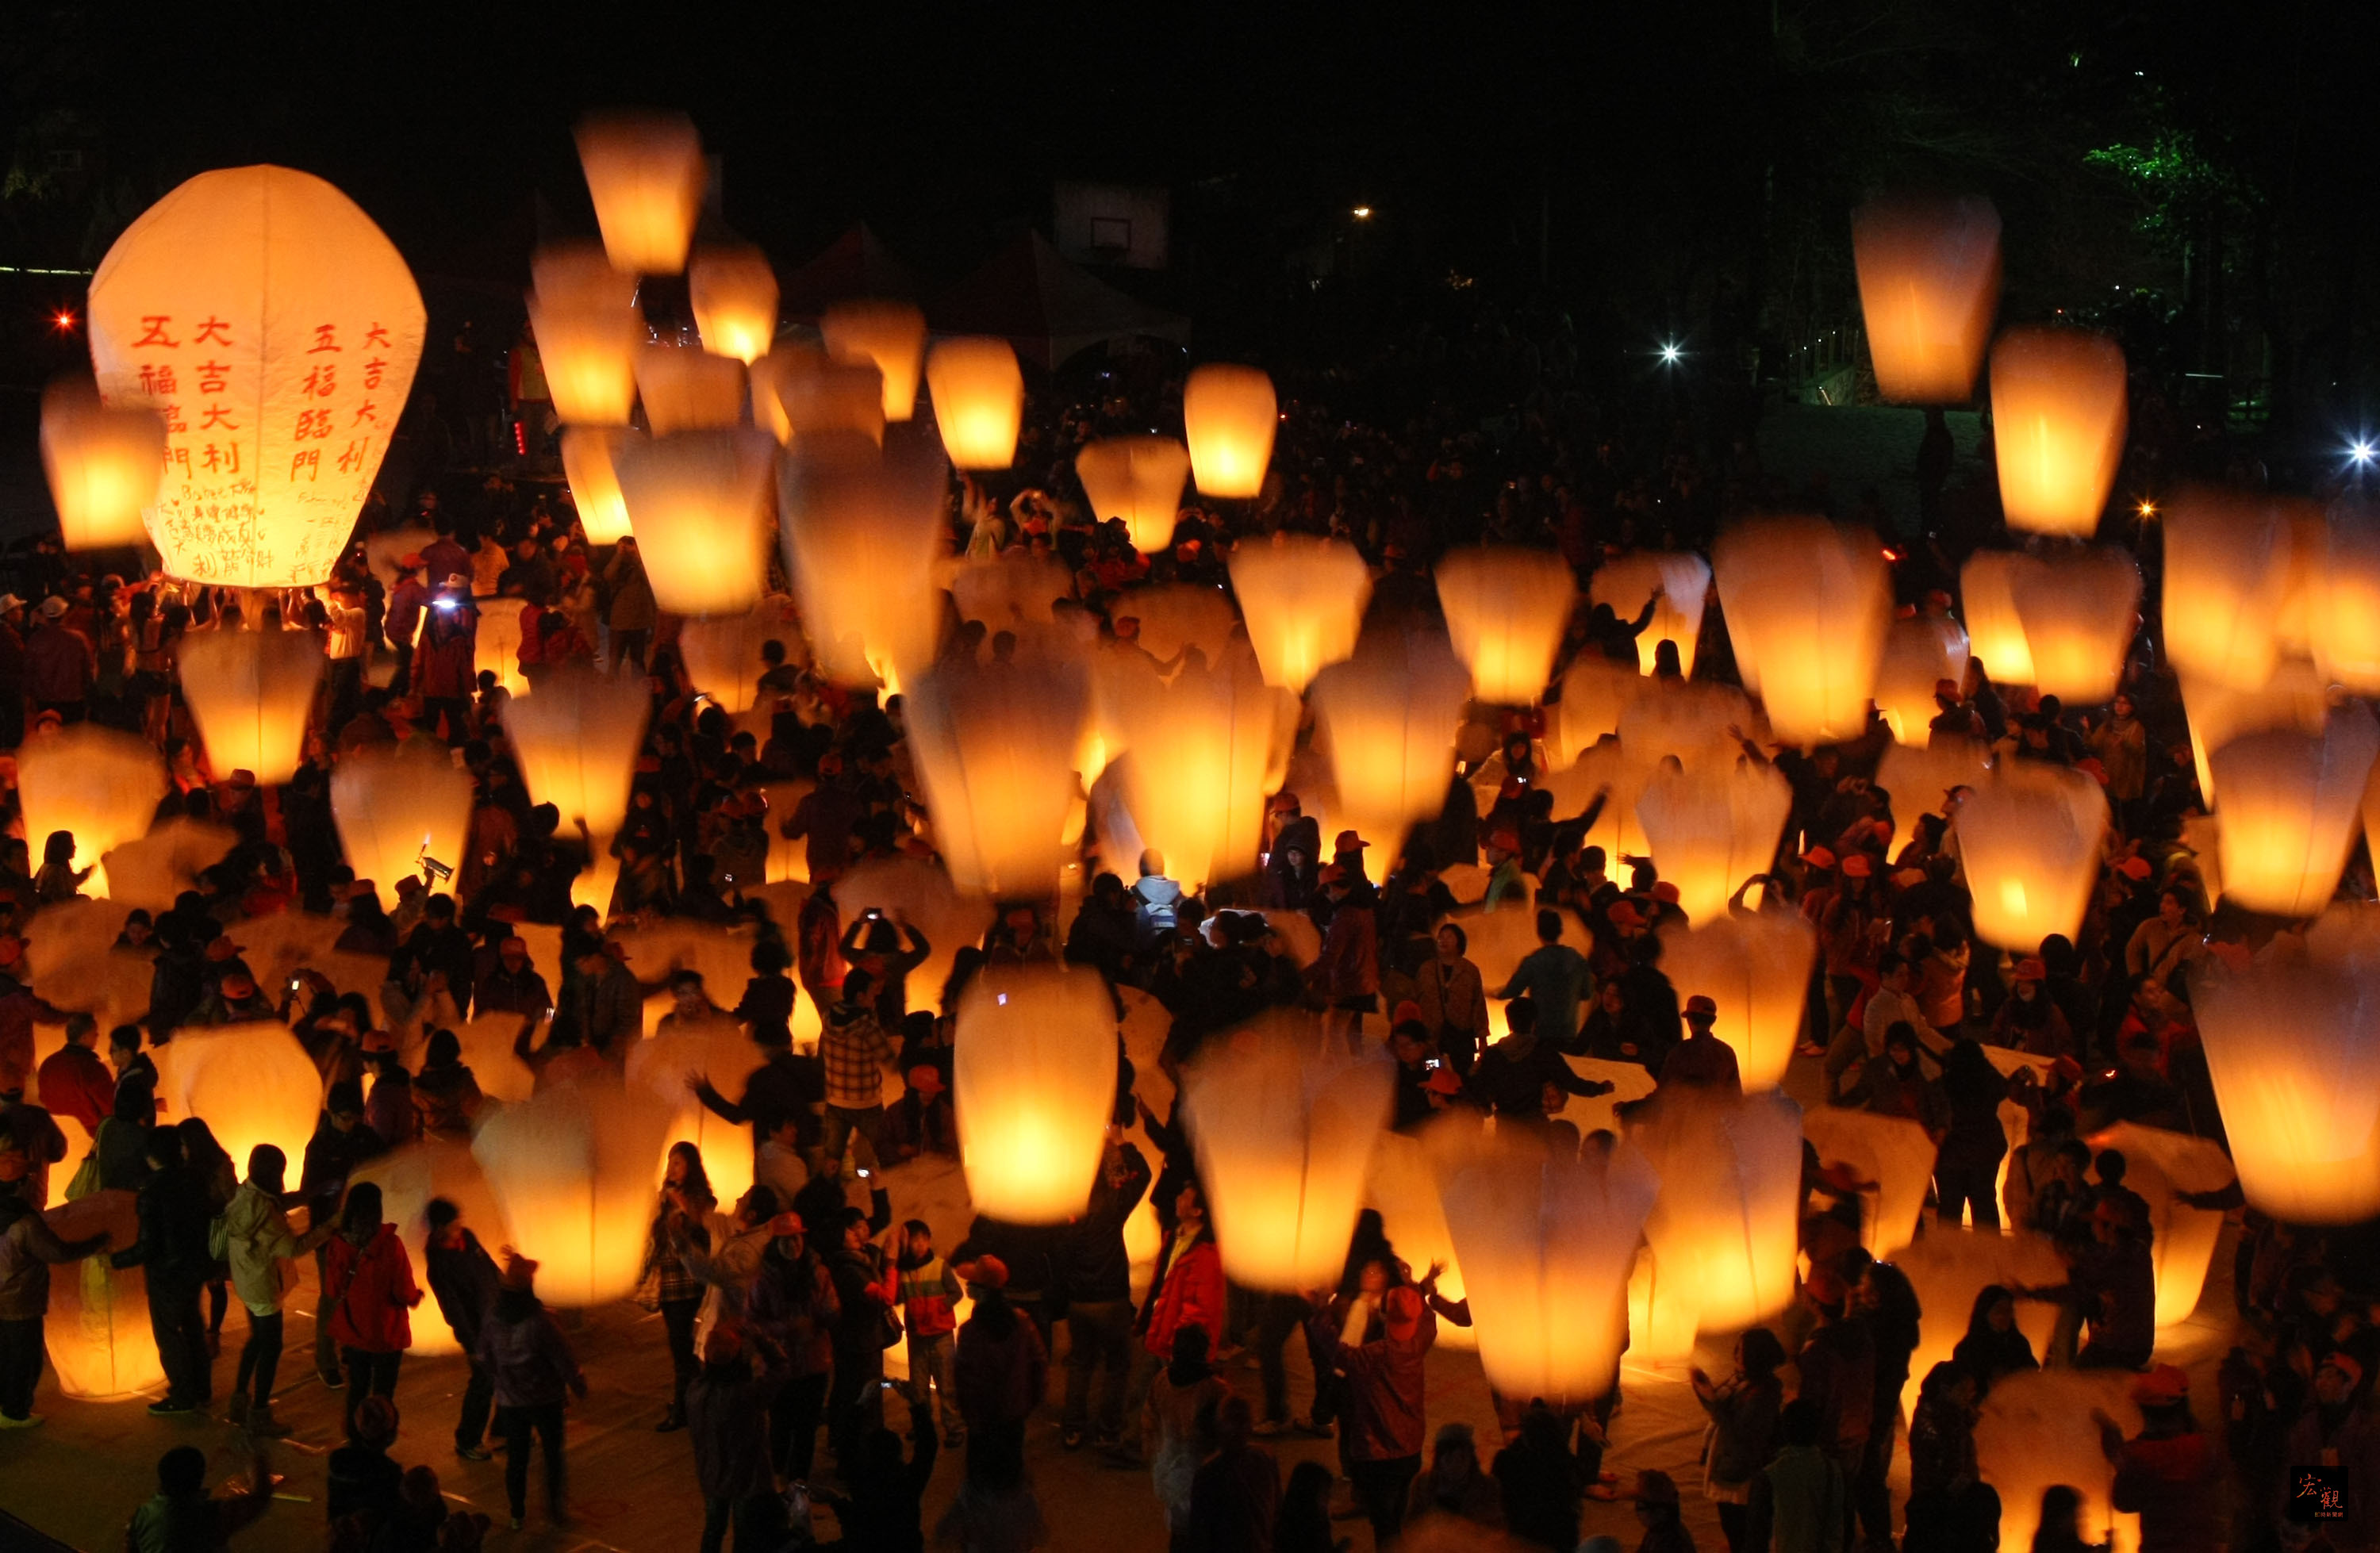 Taiwan' Pingxi Sky Lantern Festival is ranked among the 15 Festivals to Attend Before You Die